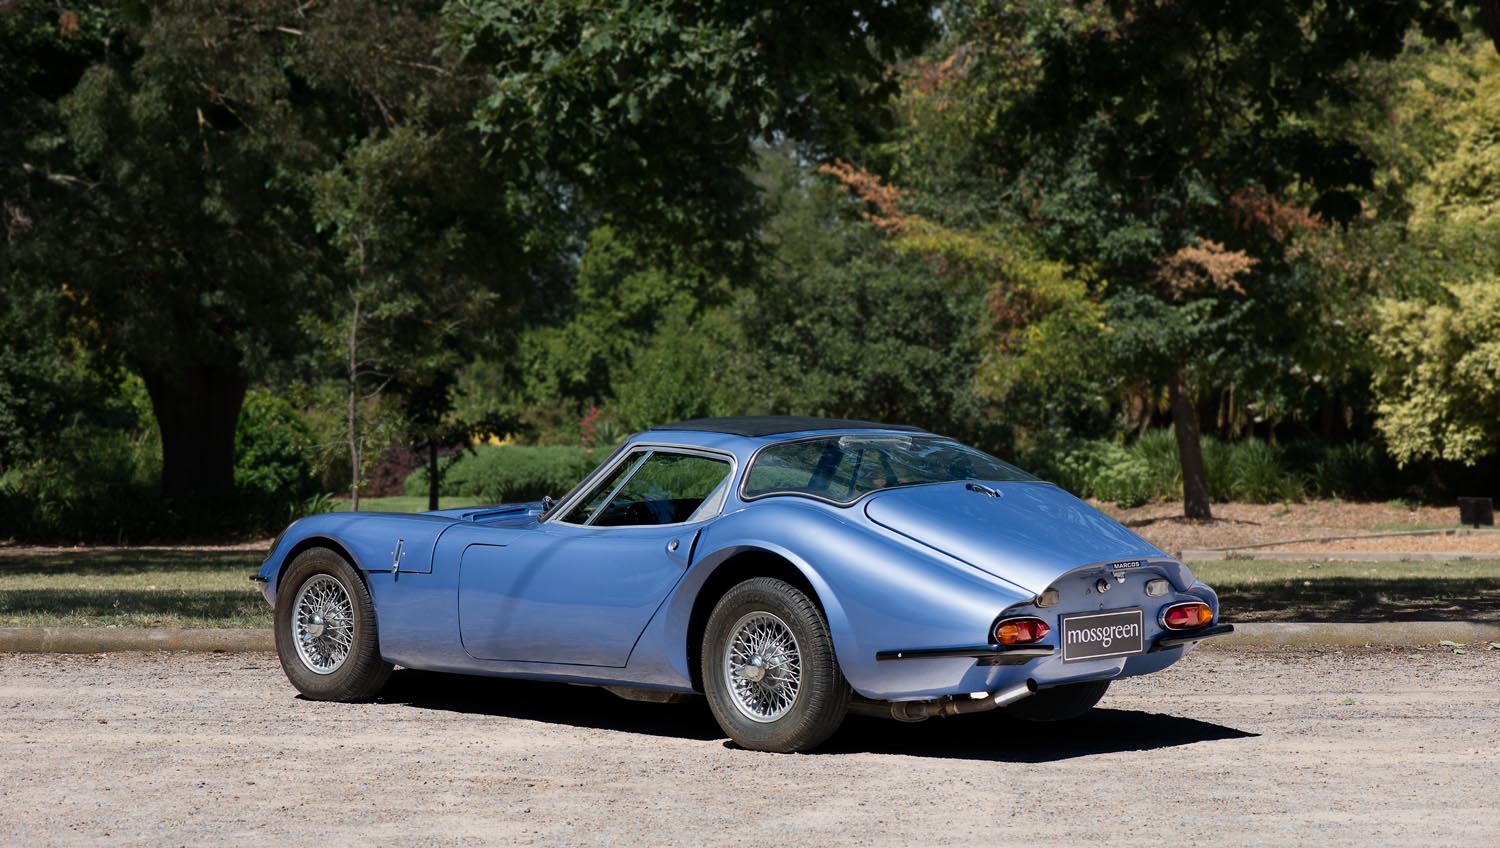 1967 Marcos 1650 GT Lawrence-tune - Image 2 of 9